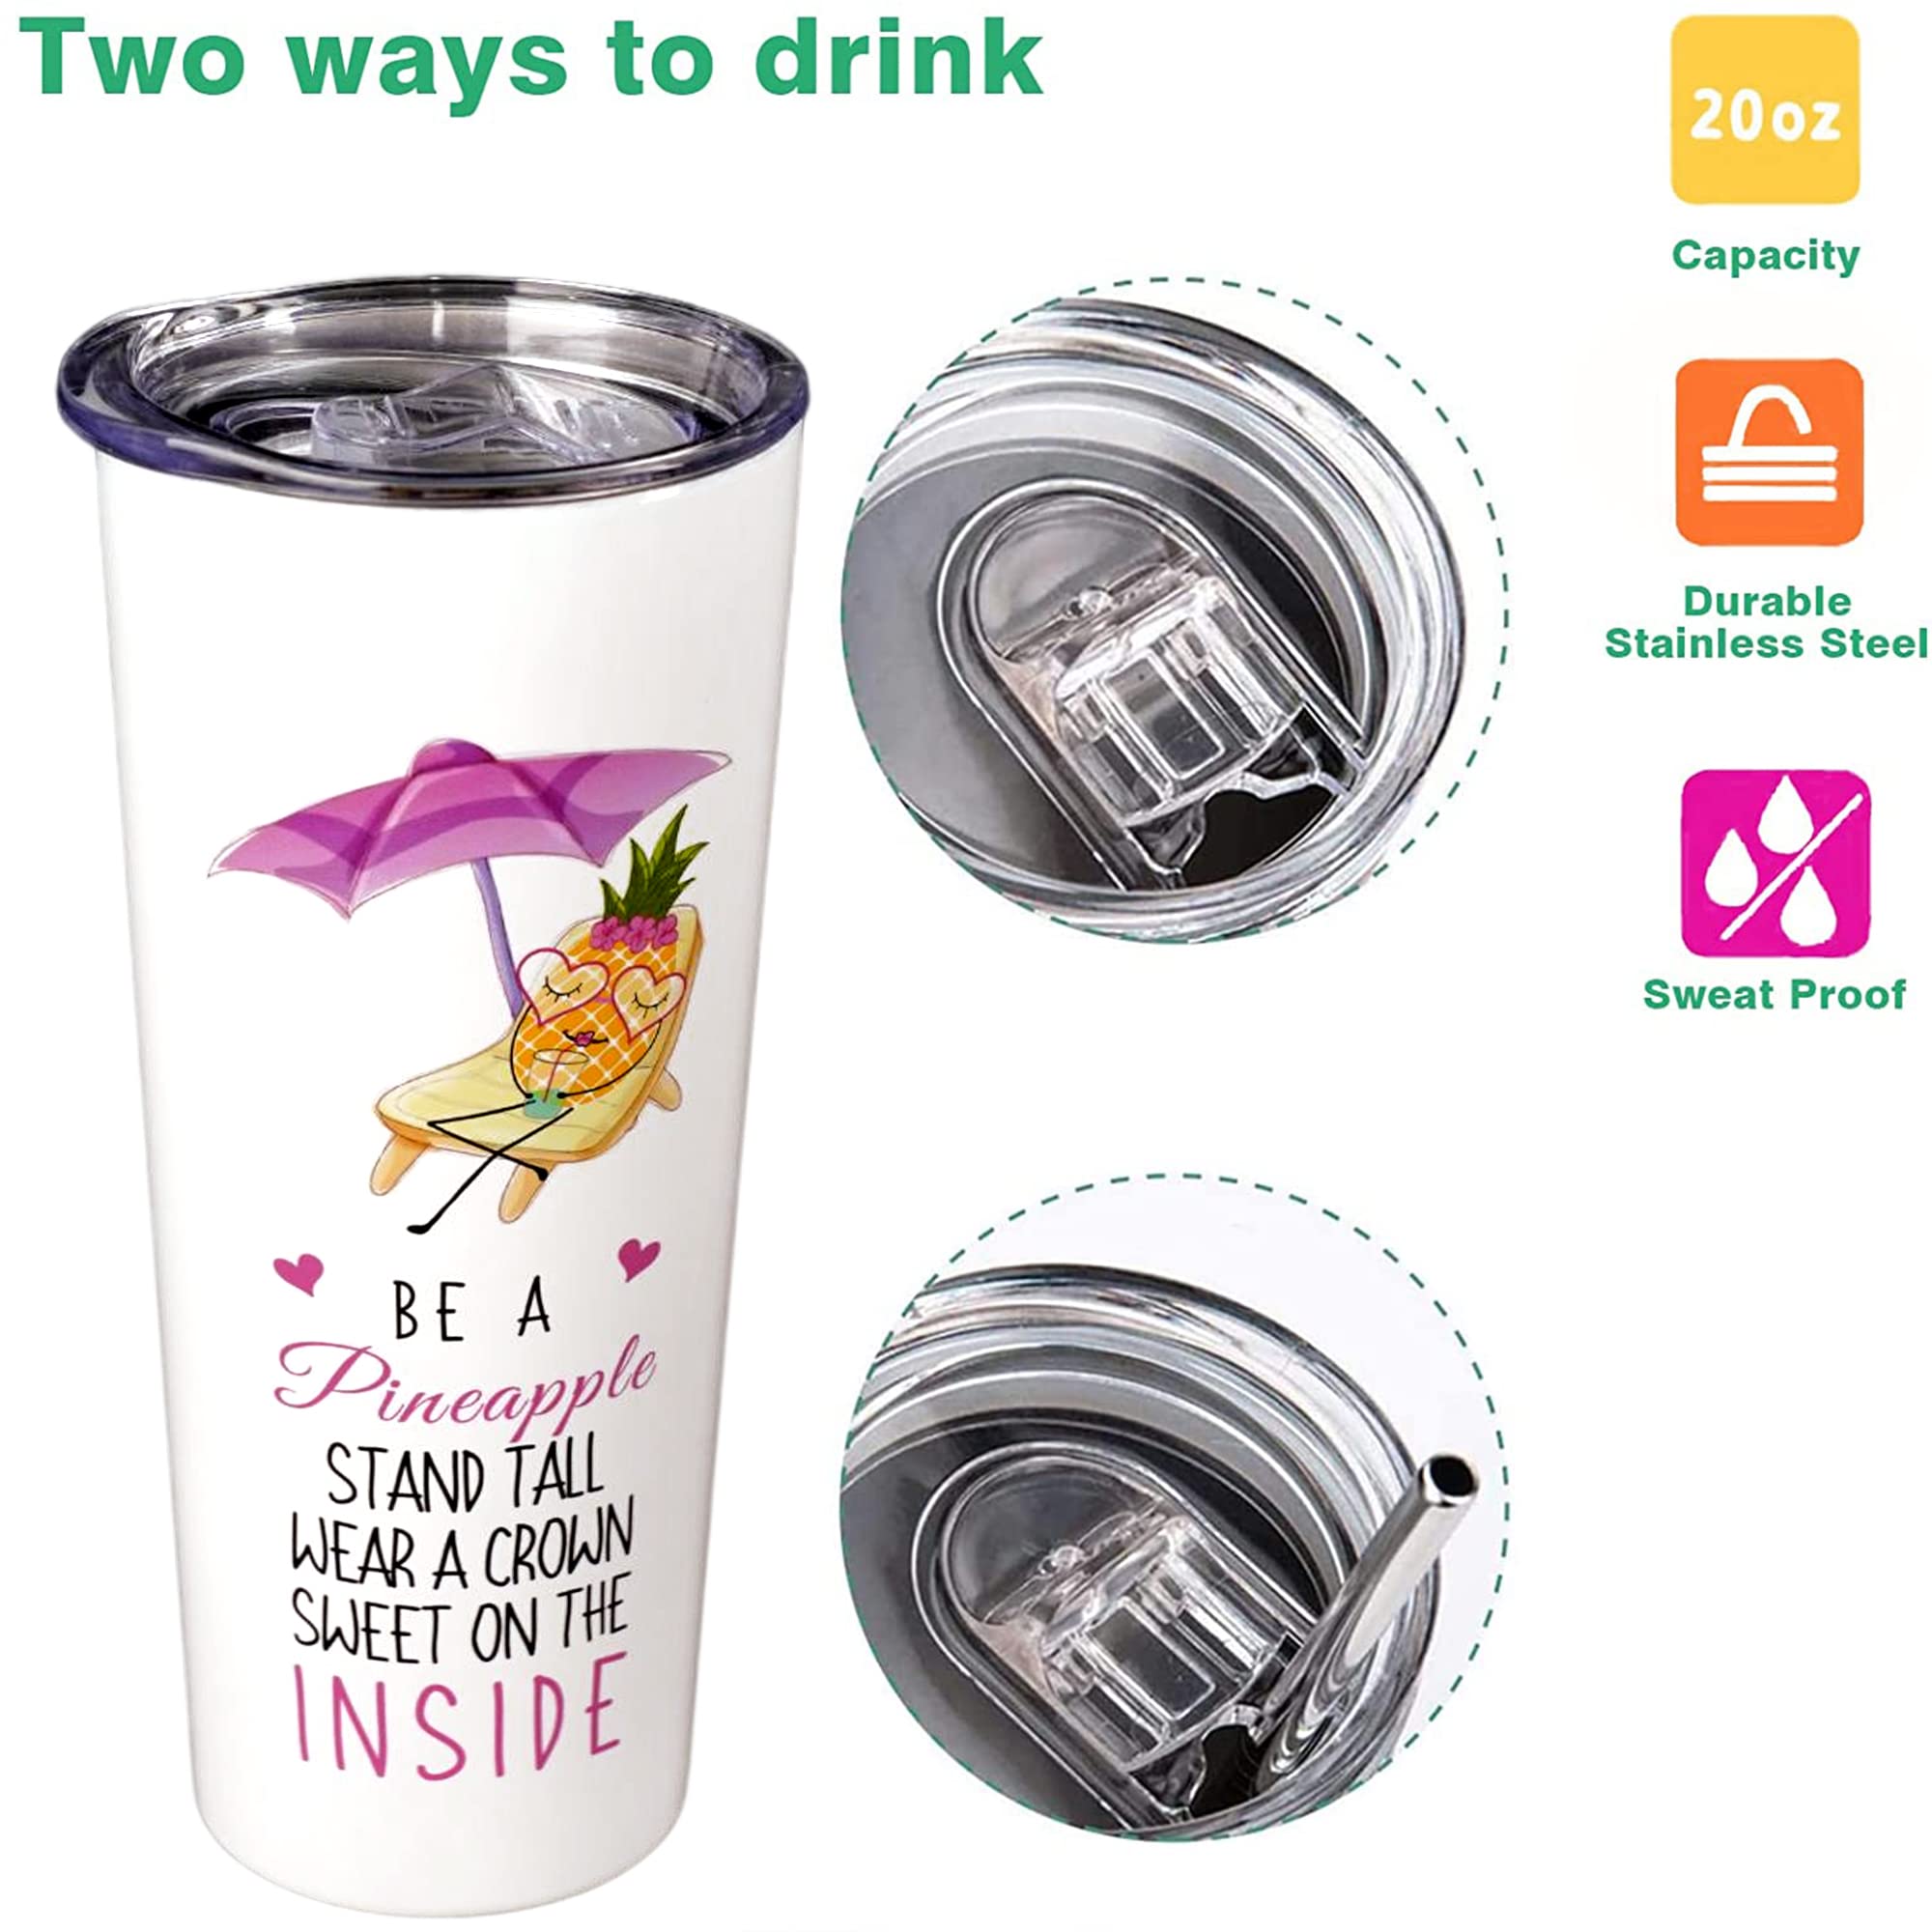 Mhrevyi Pineapple Tumbler - Pineapple Gifts for Women - Pineapple Print Skinny Tumblers With Lid and Straw - Double Wall Tumbler